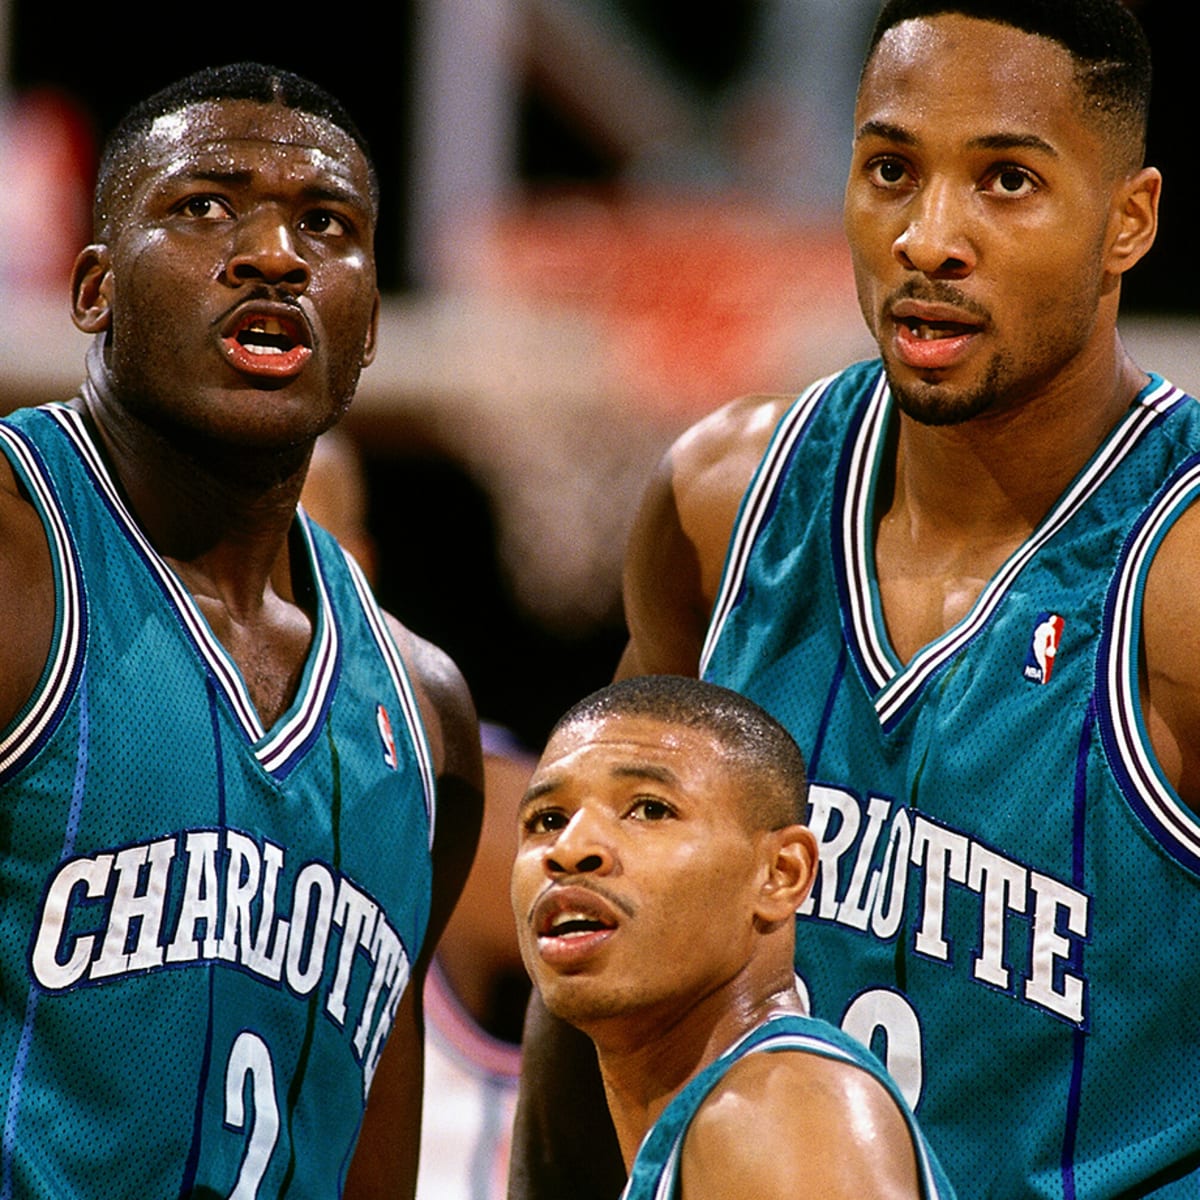 Muggsy Bogues on NBA success, childhood shooting, filming Space